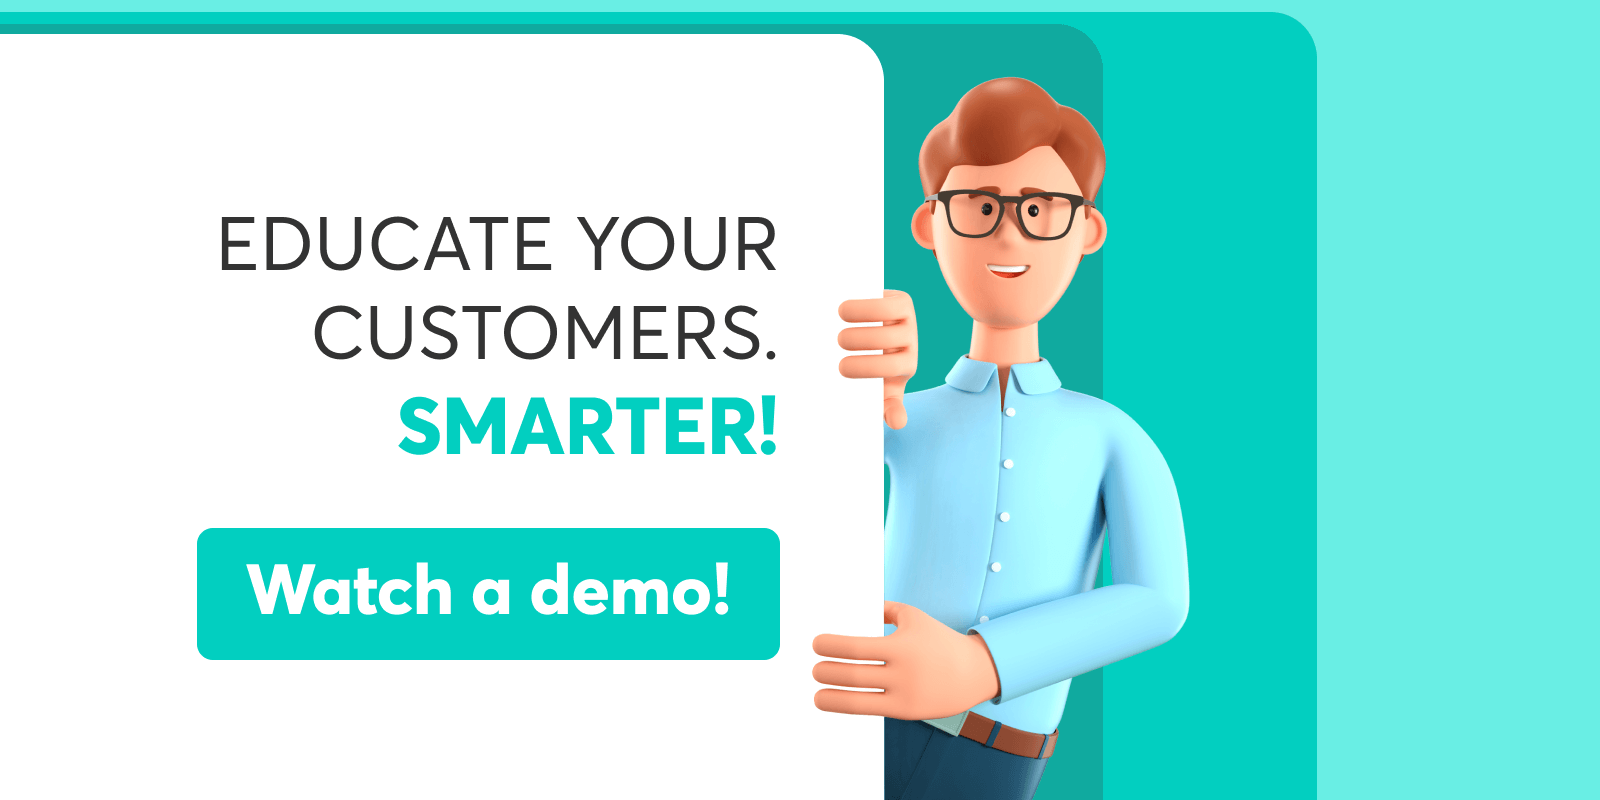 Educate your customers smarter - watch a demo